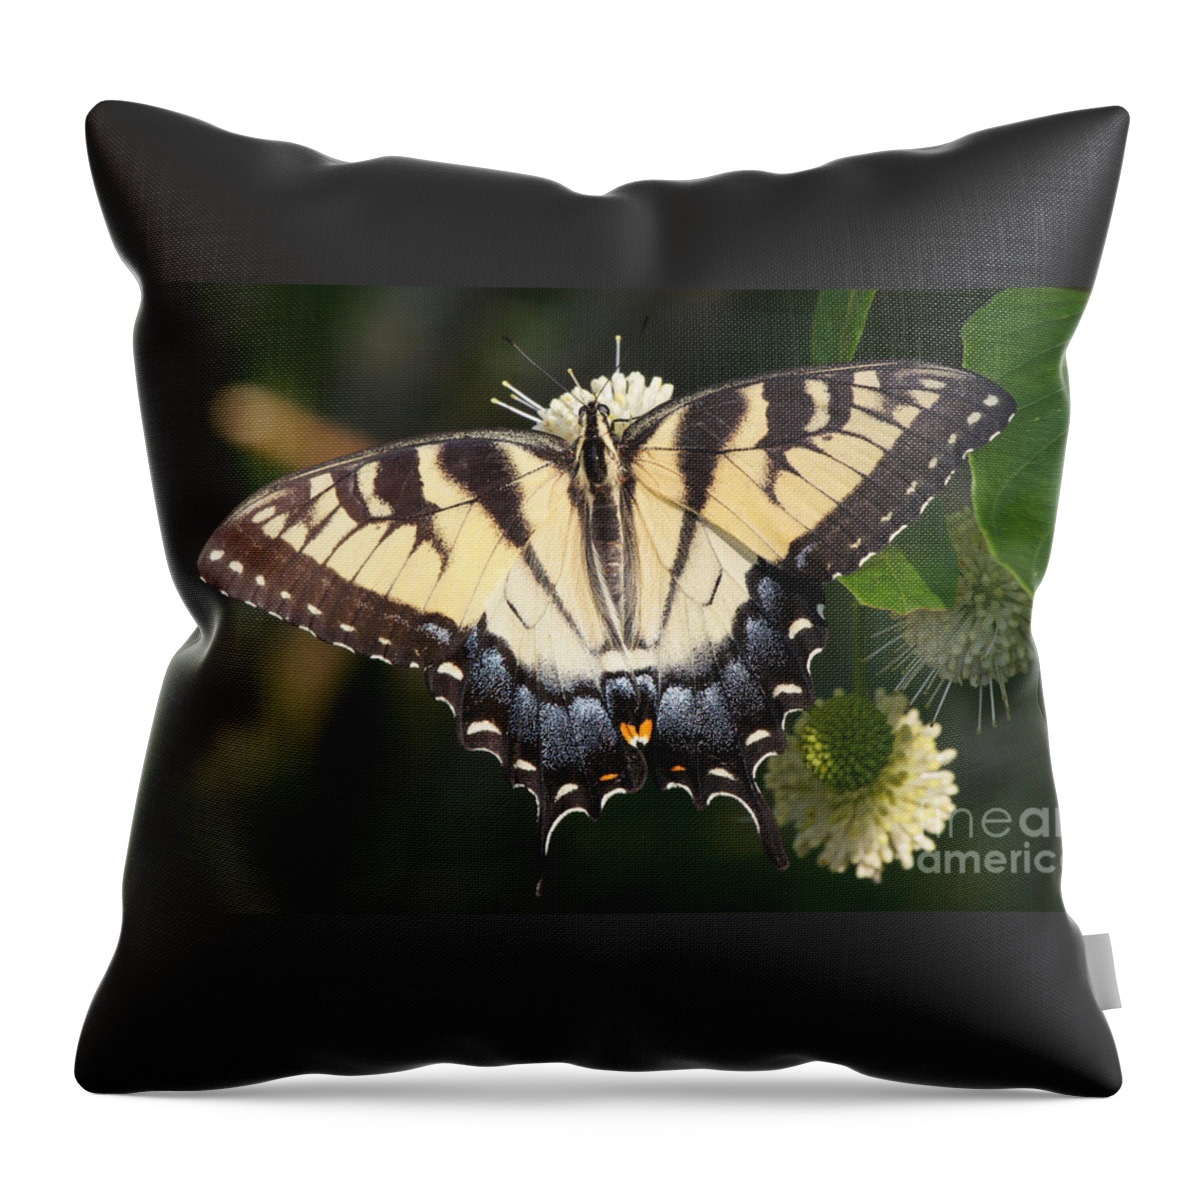 20140711-14137_v1-tigerswallowtail Throw Pillow featuring the photograph Tiger Swallowtail Butterfly on Button Bush by Robert E Alter Reflections of Infinity